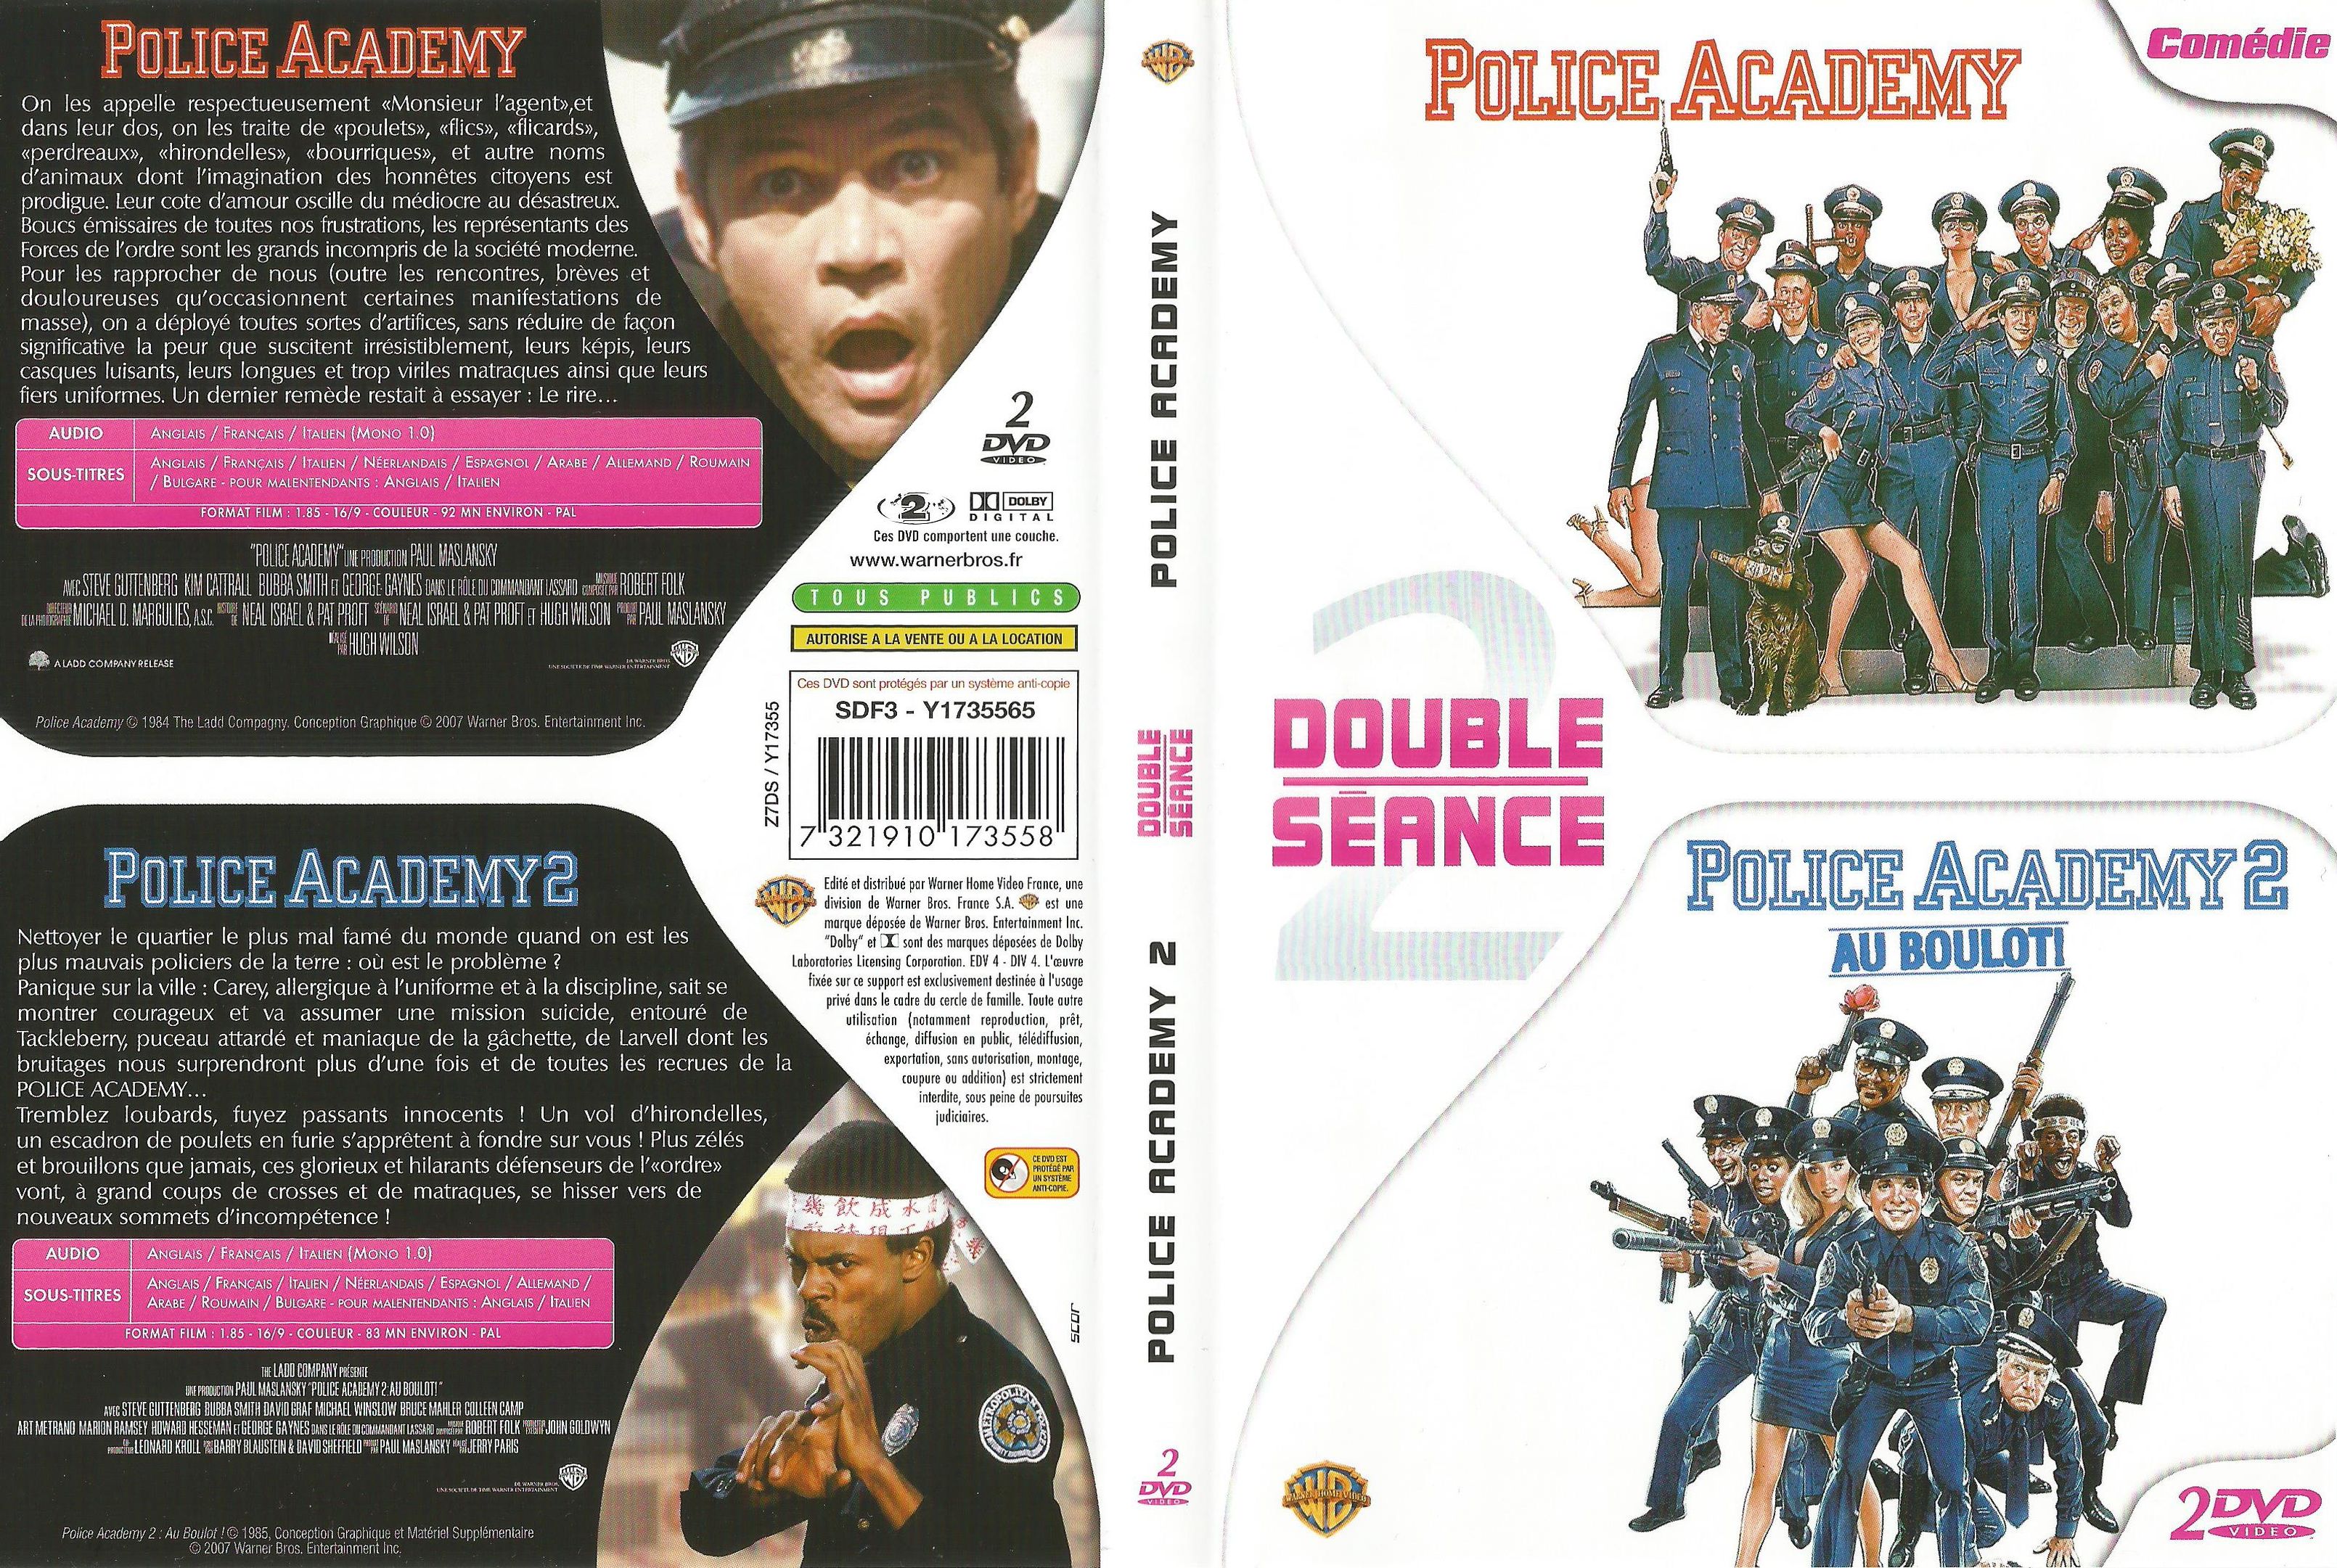 Jaquette DVD Police academy + Police academy 2 au boulot